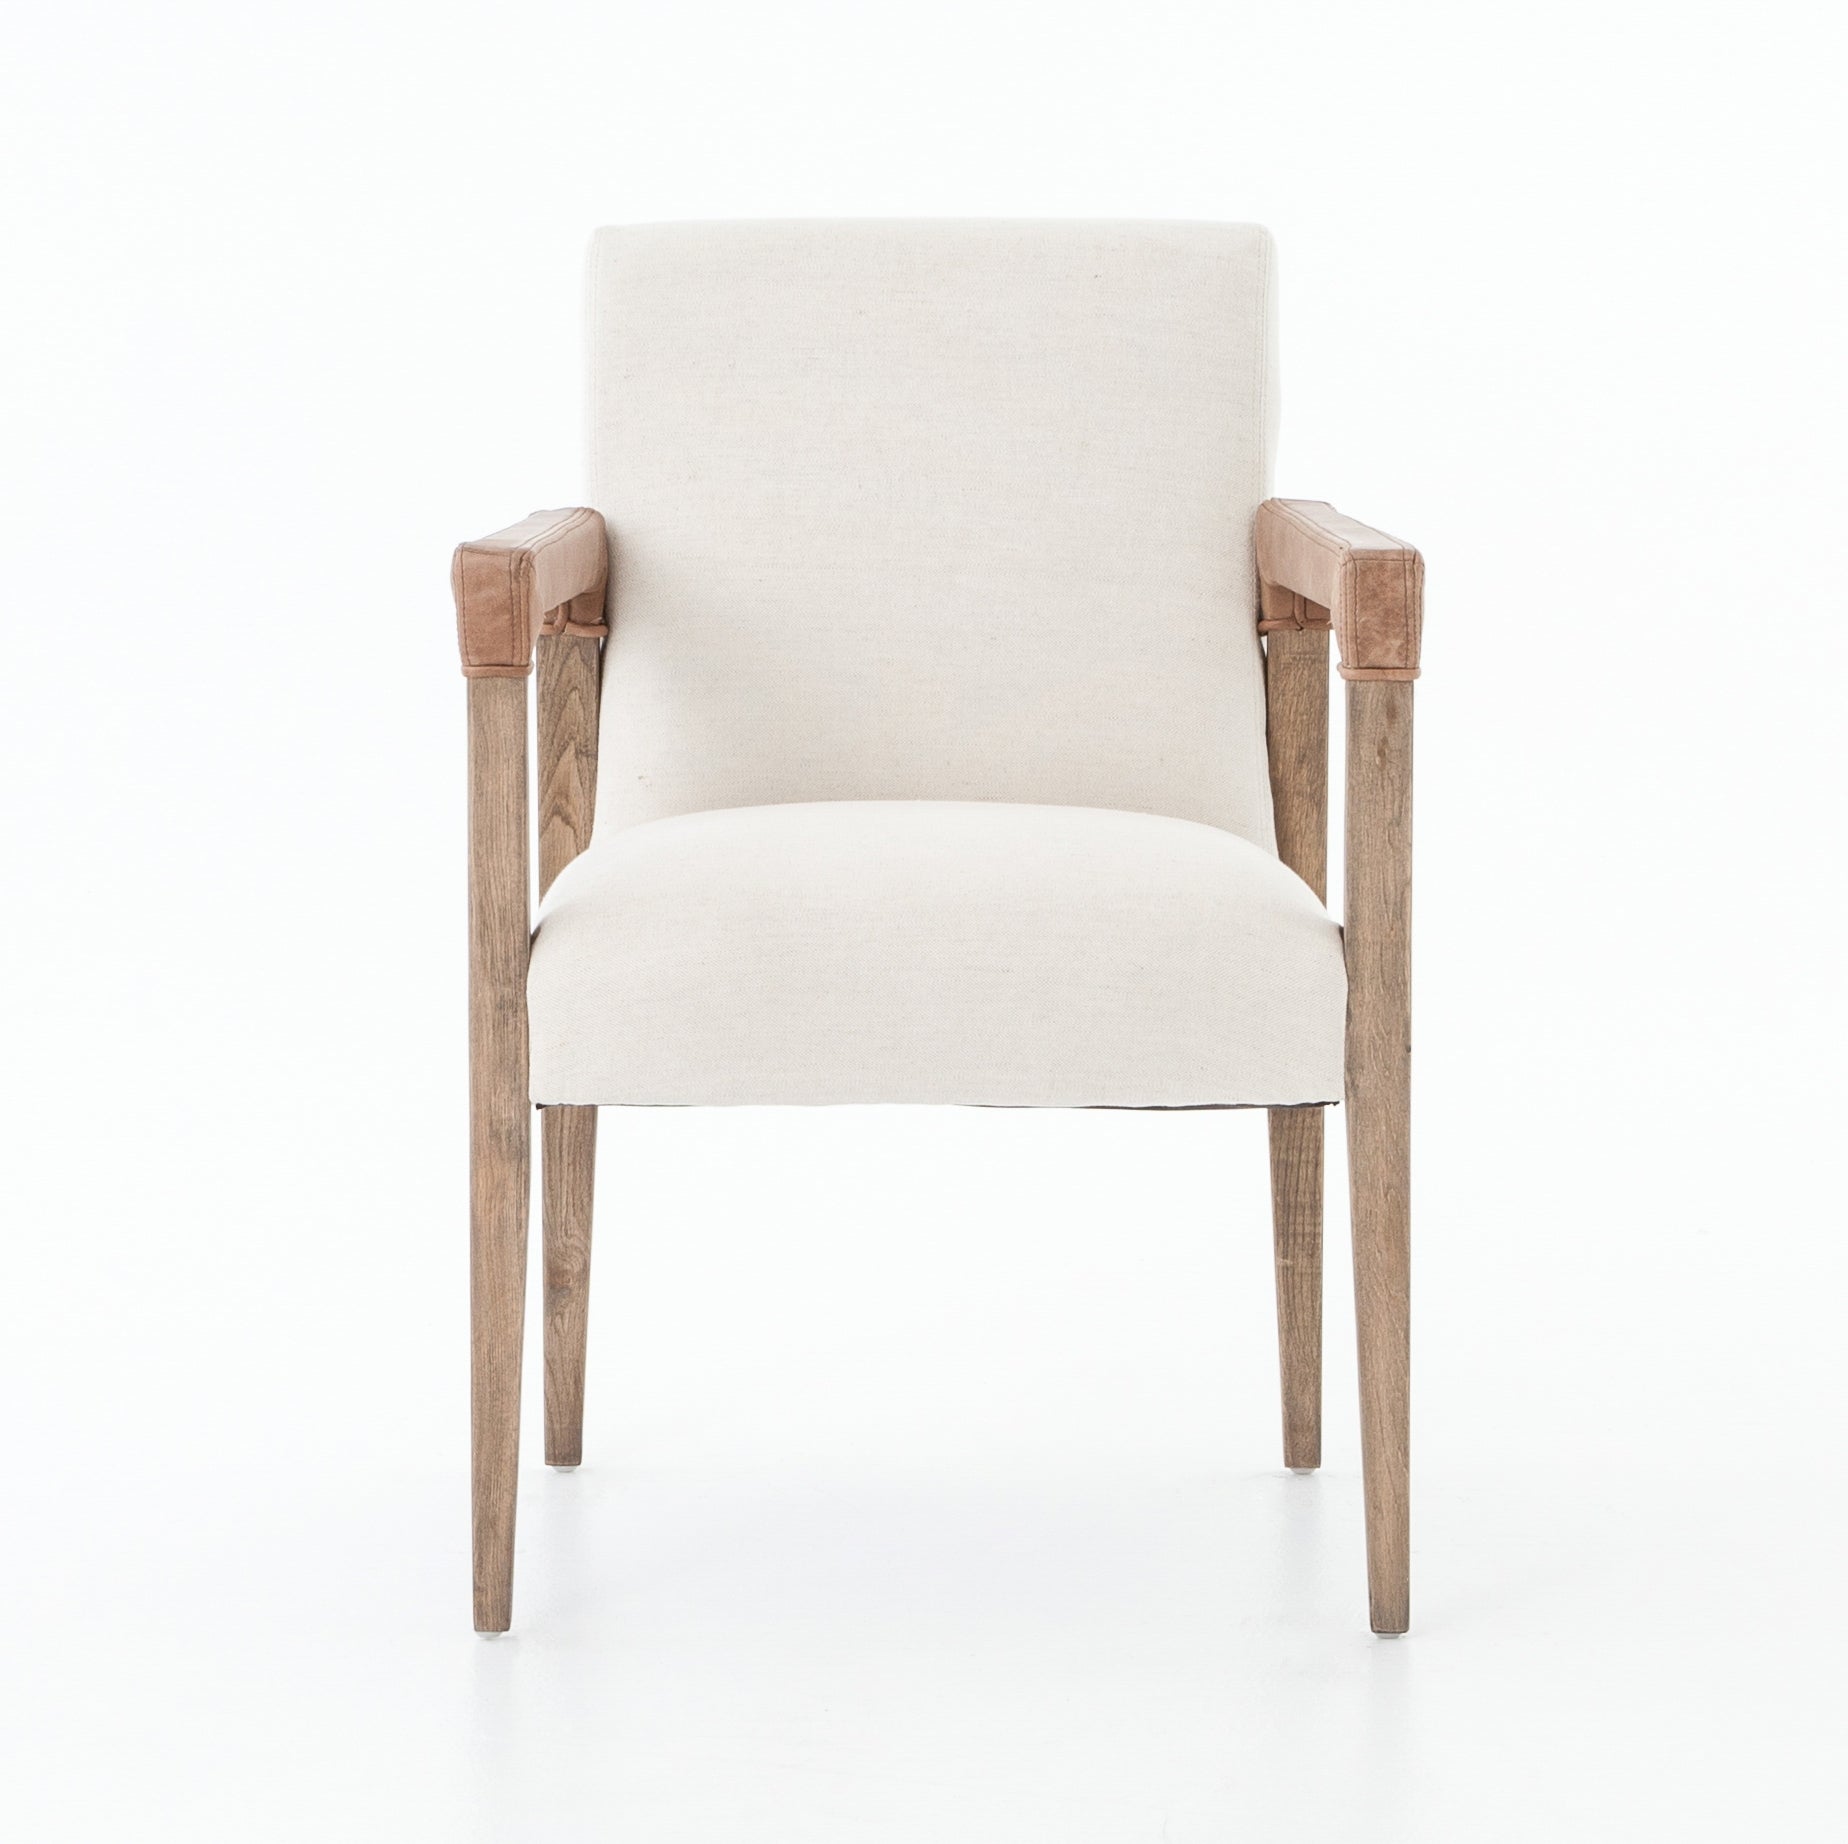 Elegance is no exaggeration with this Reuben Dining Chair - Harbor Natural. Slim, tapered oak with arms wrapped in vintage leather frames a floating seat covered in natural linen. We'd love to see this in your dining room, kitchen, or other space!  Overall Dimensions: 23.25"w x 25.50"d x 33.75"h